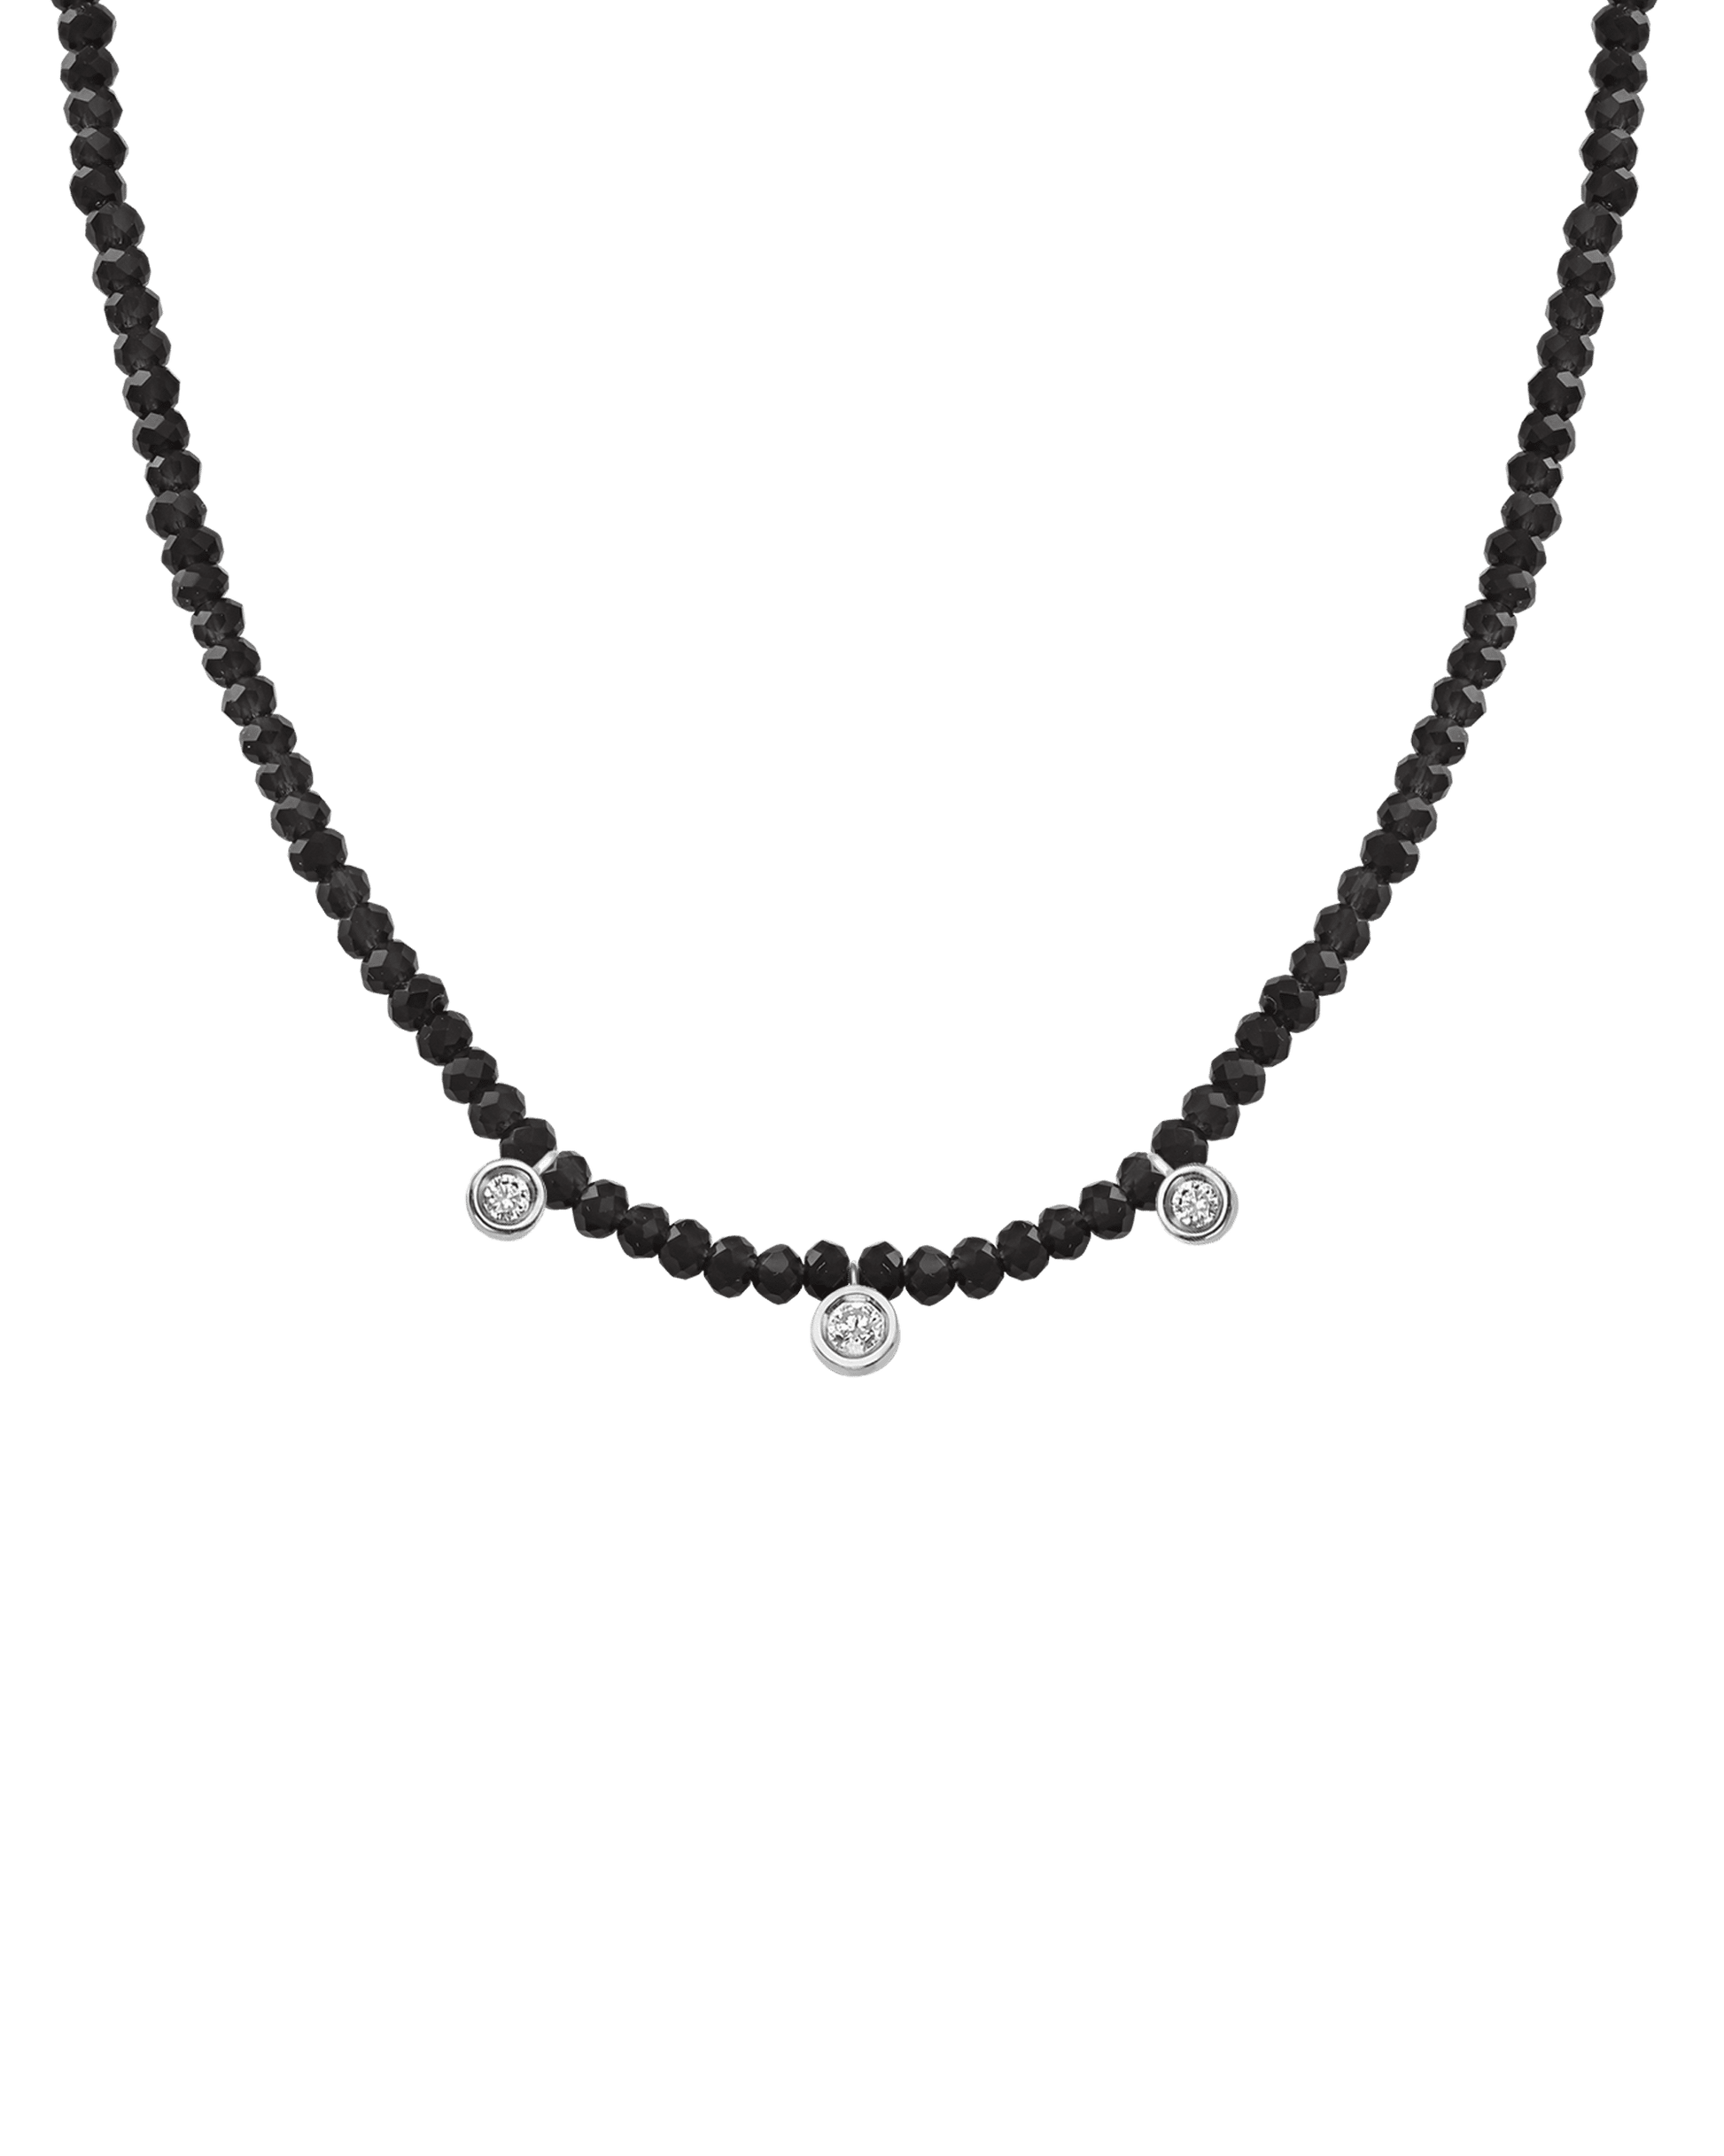 Emerald Gemstone & Three diamonds Necklace - 14K White Gold Necklaces magal-dev Glass Beads Black Spinnel 14" - Collar 